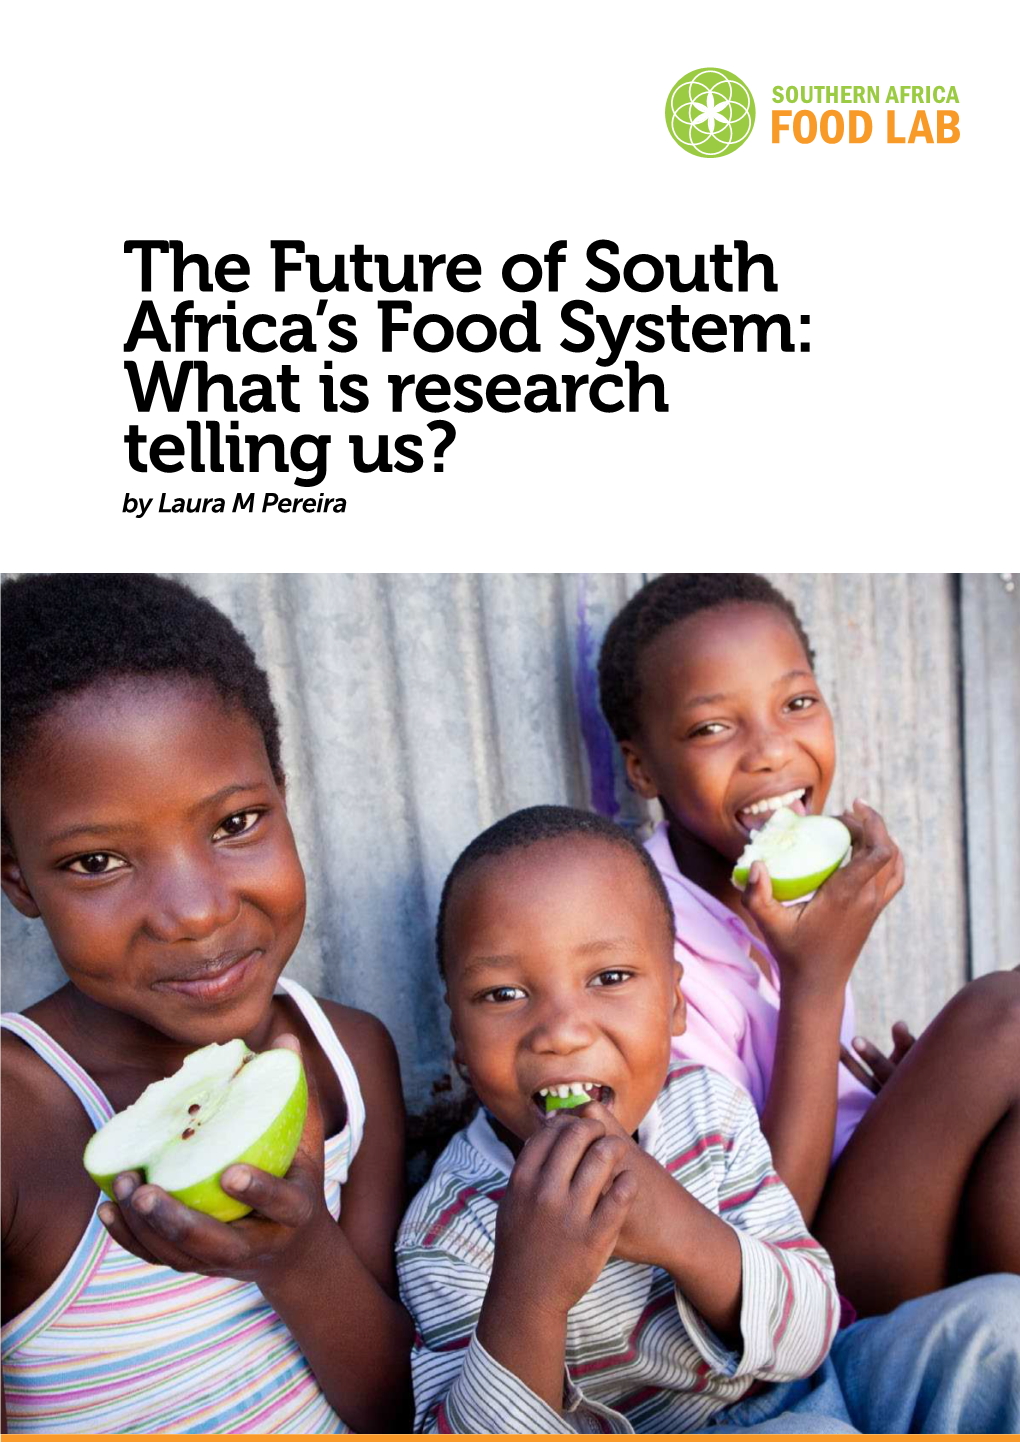 The Future of South Africa's Food System